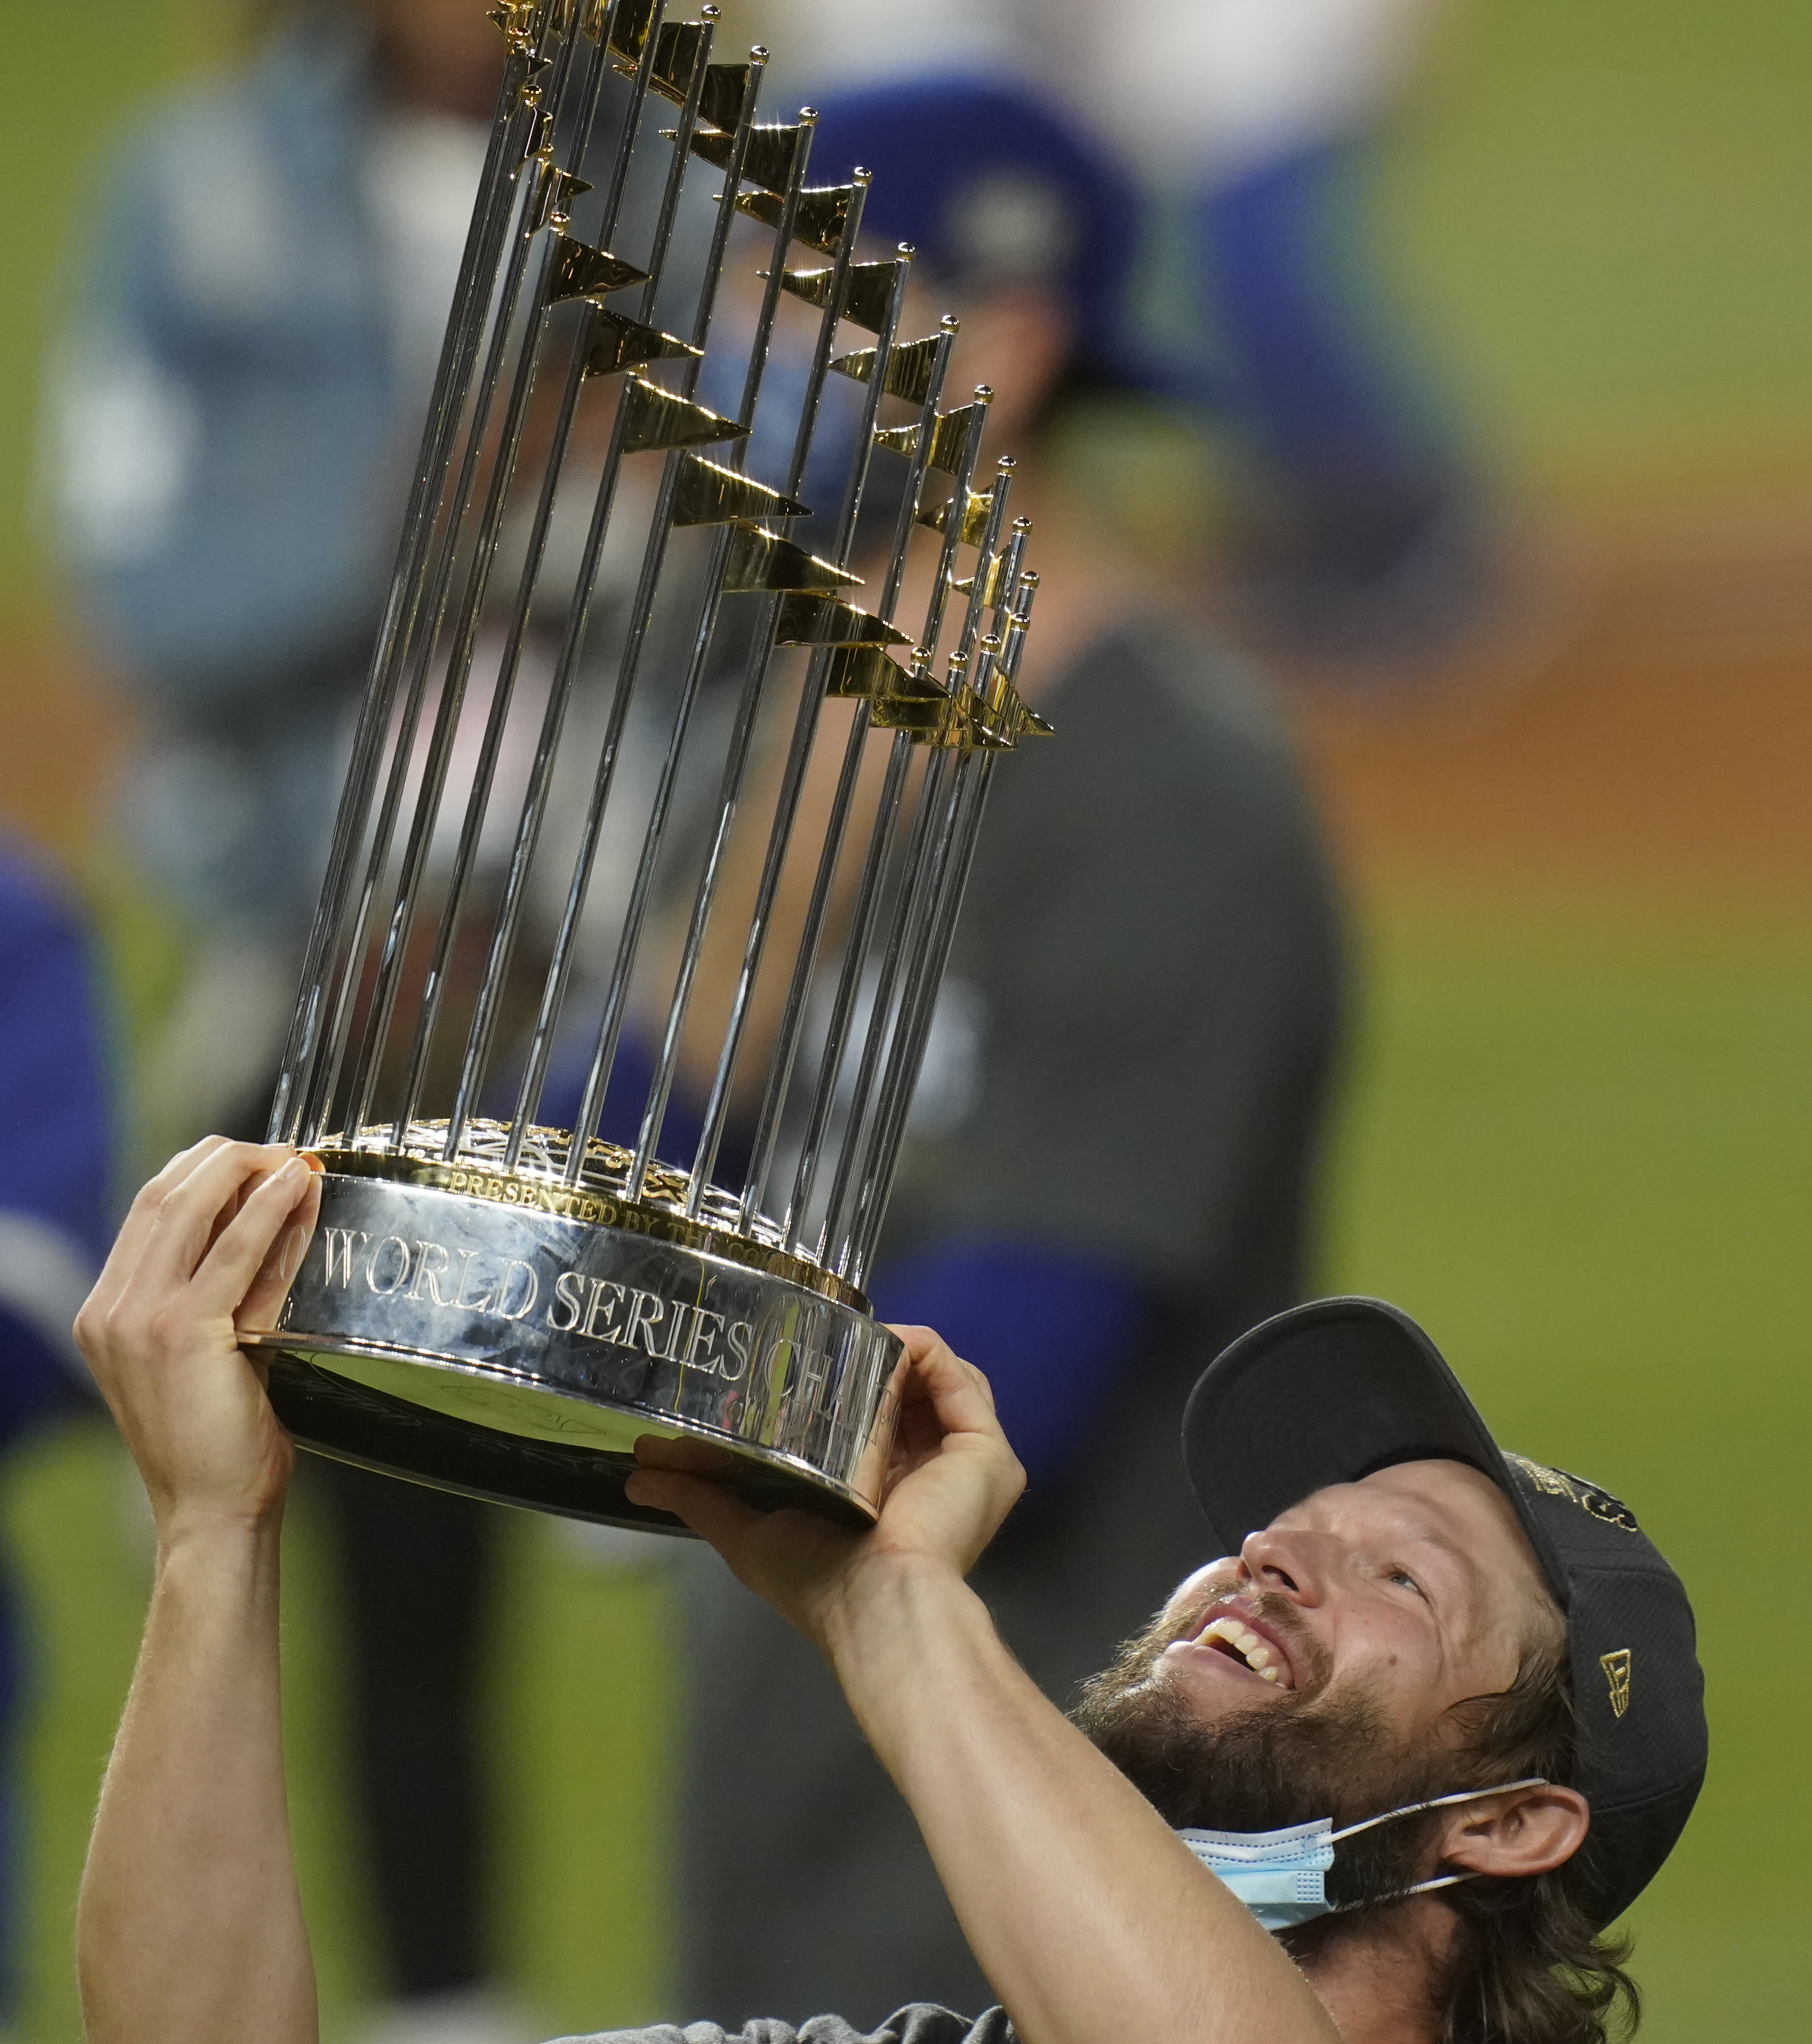 Dodgers ace Kershaw finally wins elusive World Series title